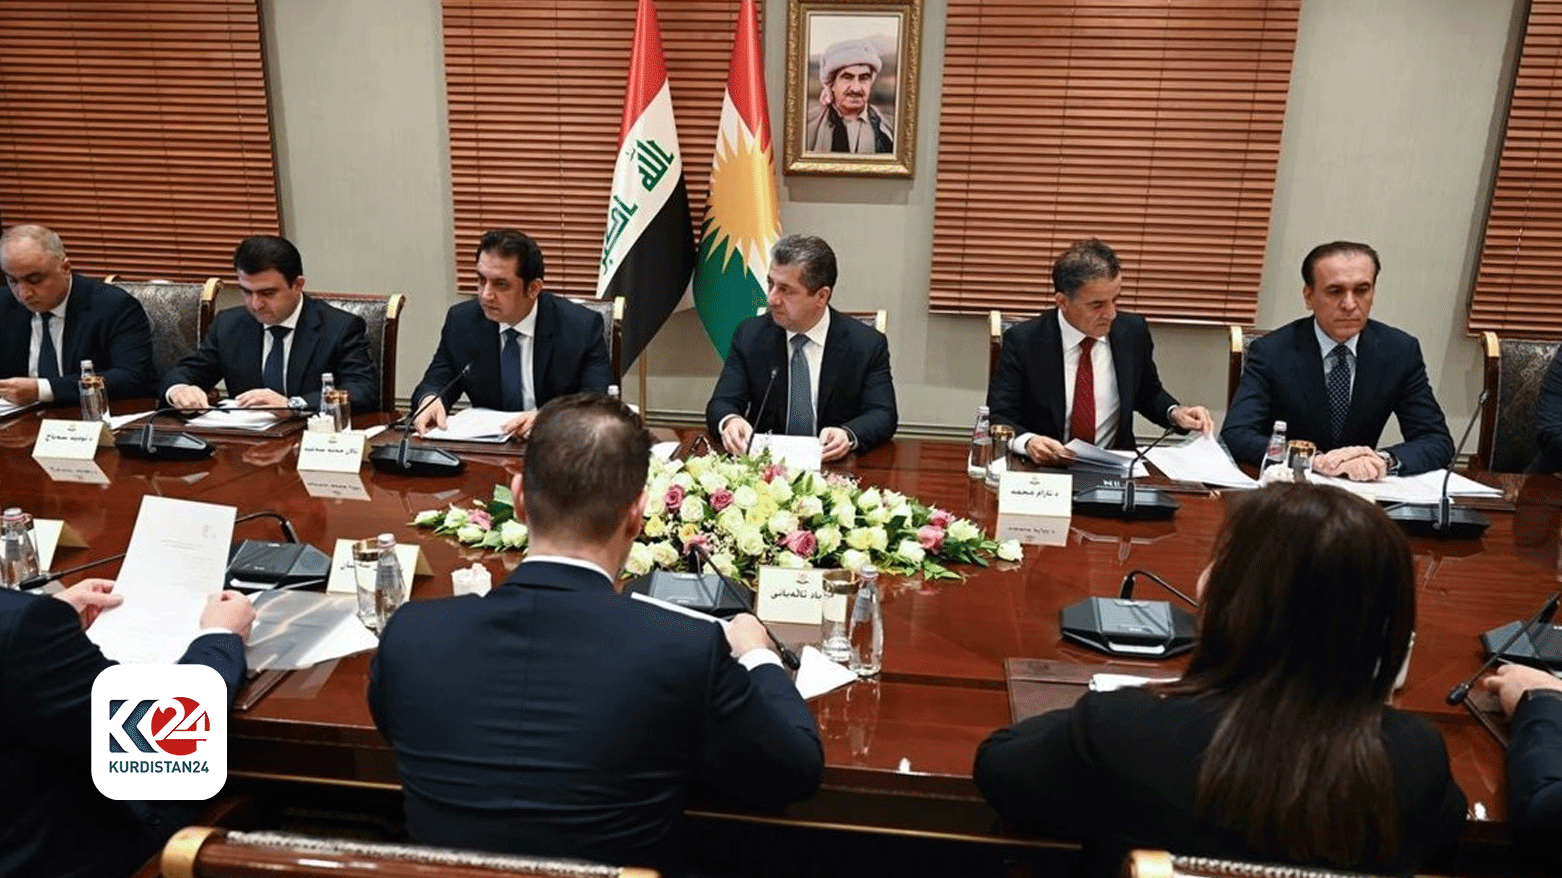 Kurdistan Region Prime Minister Masrour Barzani chairs the inaugural meeting of the High Council of Accreditation for Education and Higher Education Programs in the Kurdistan Region. May 12, 2024. (Photo: KRG)